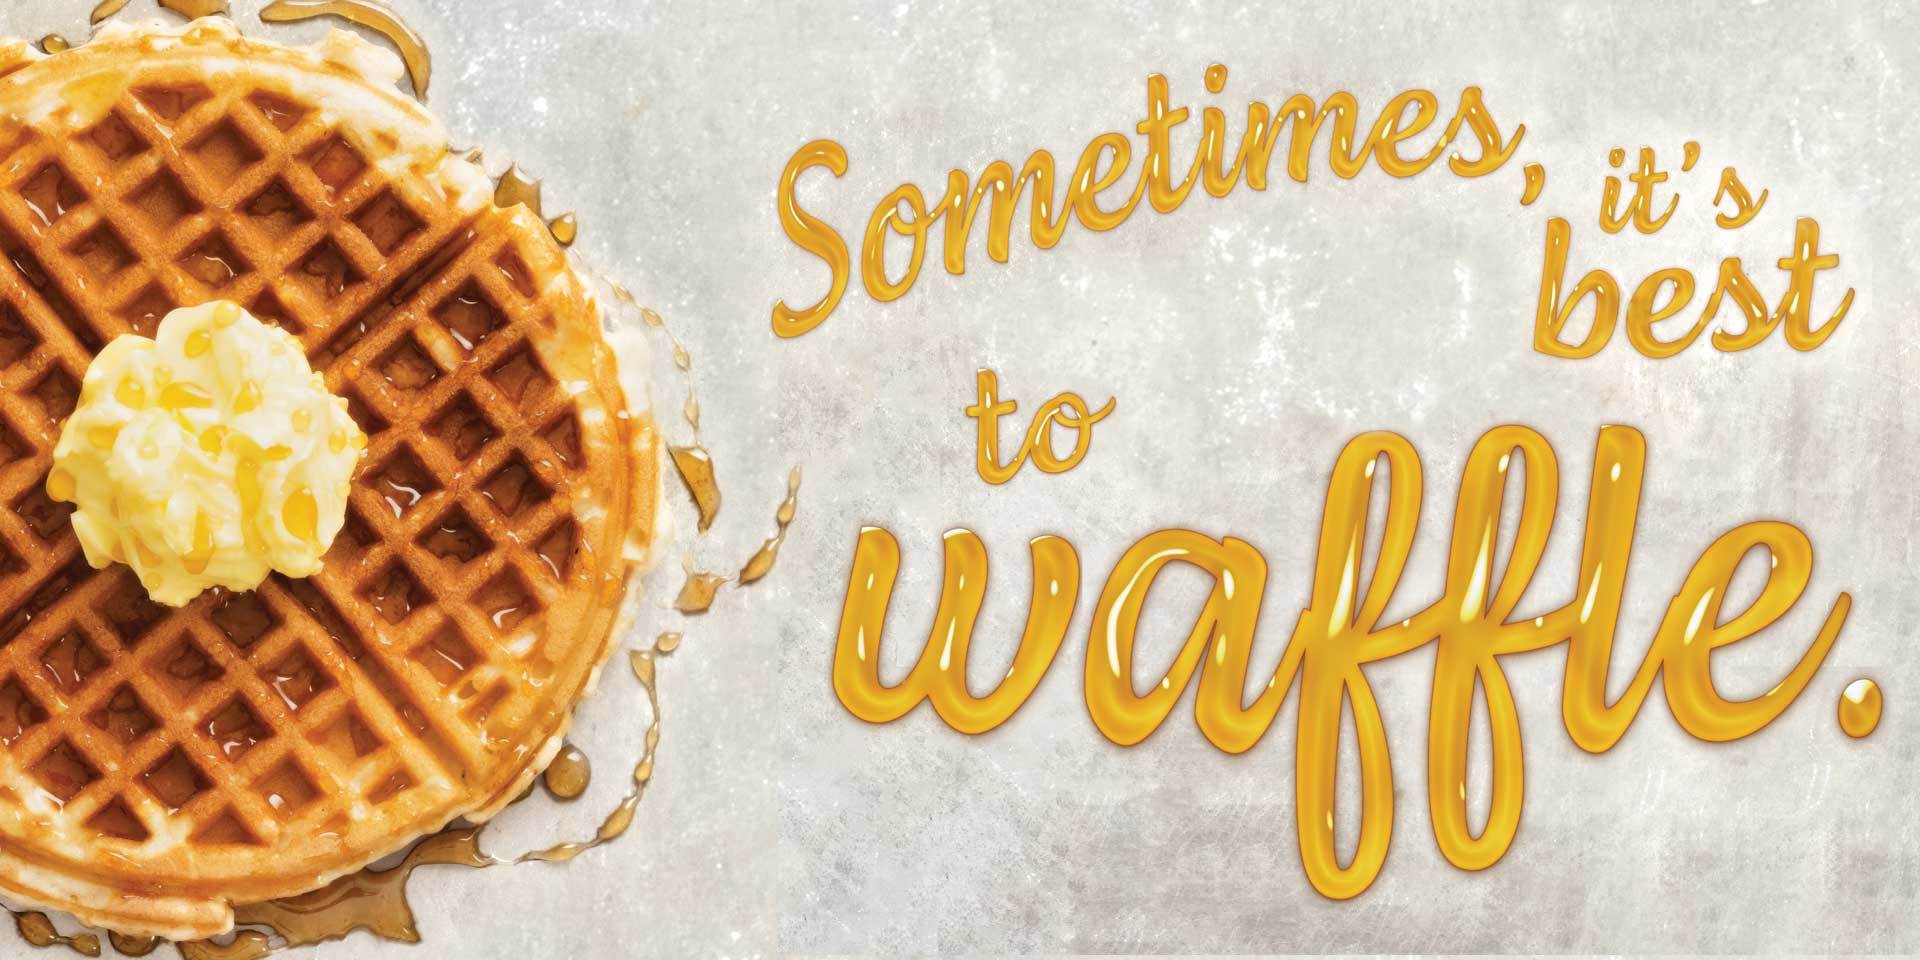 Sometimes it's best to waffle.